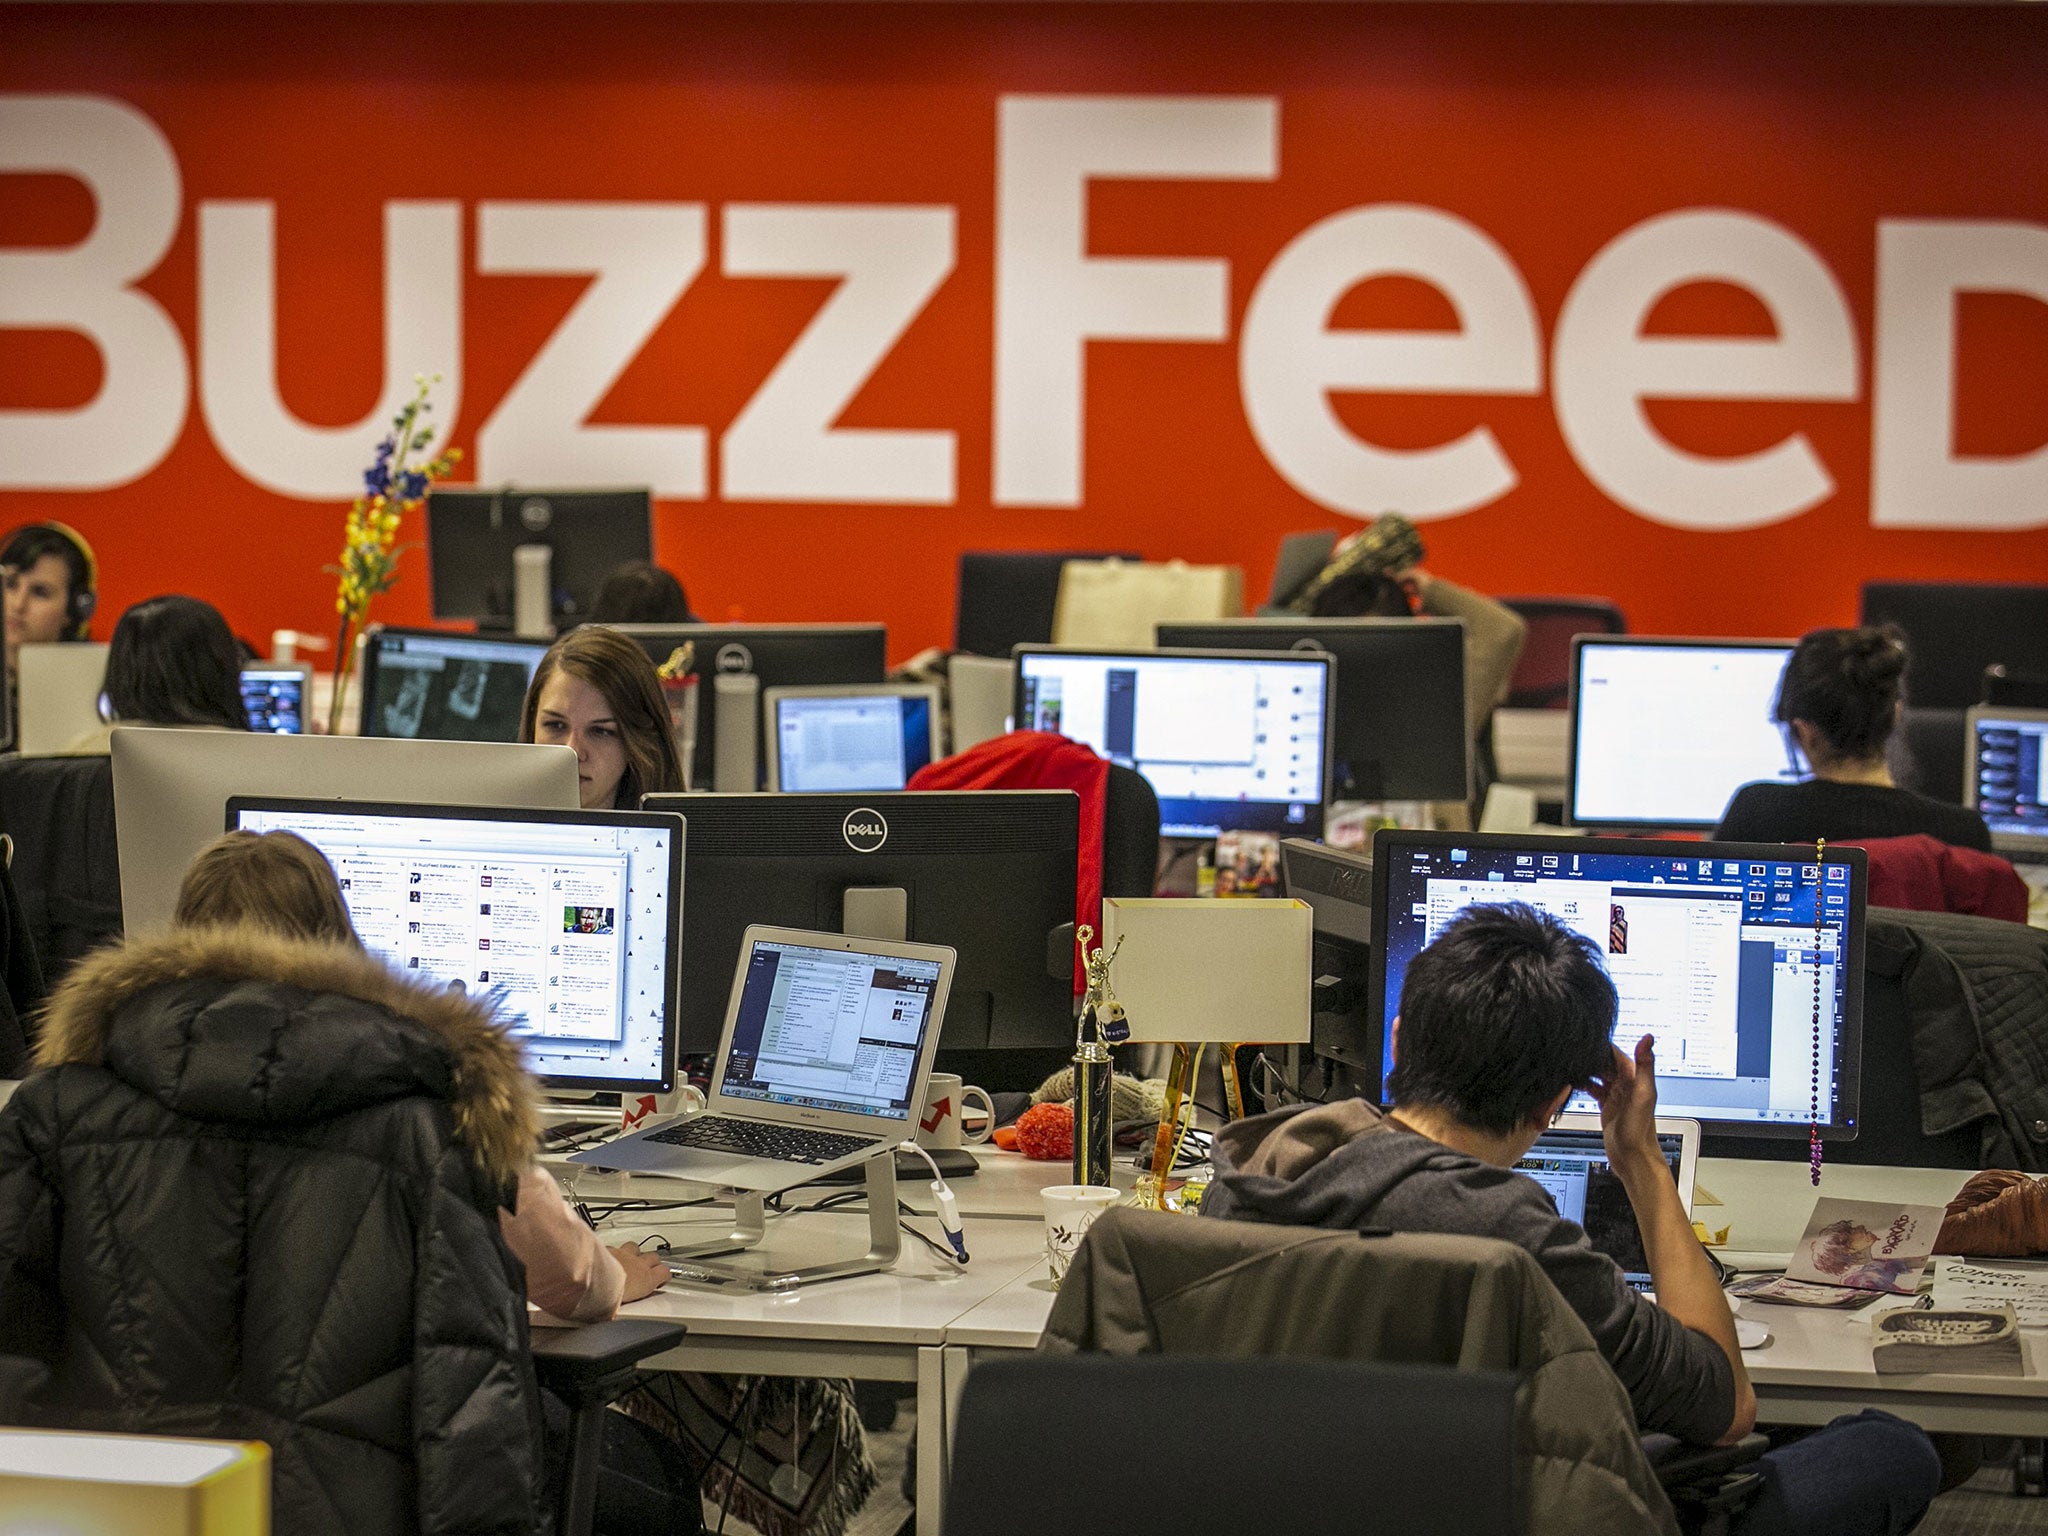 Buzzfeed, which produces viral content as well as news and in-depth investigative journalism, generated more than $300m (£229m) in revenue last year but still loses money